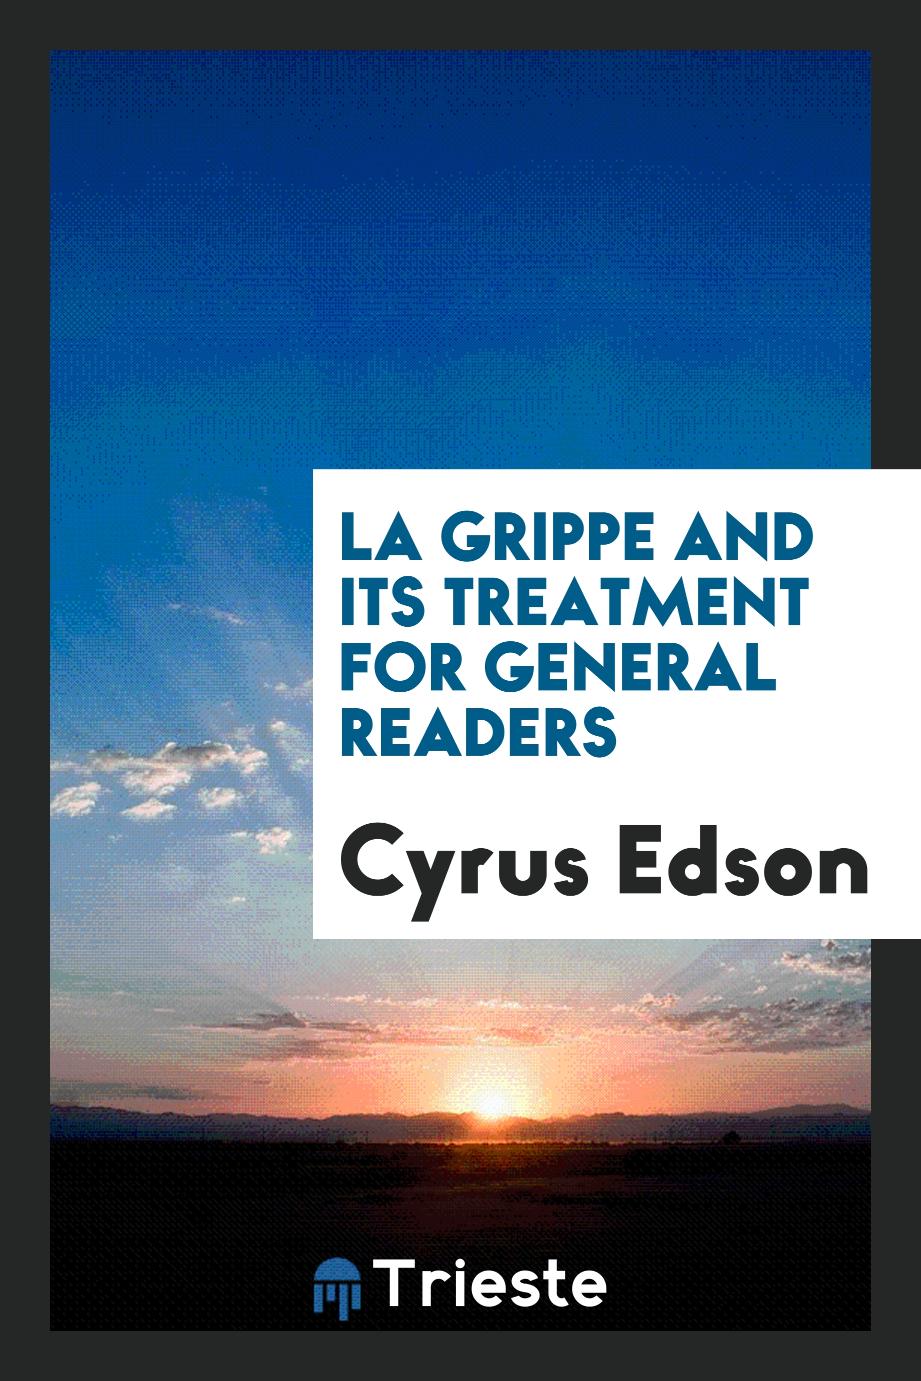 La Grippe and its treatment for general readers